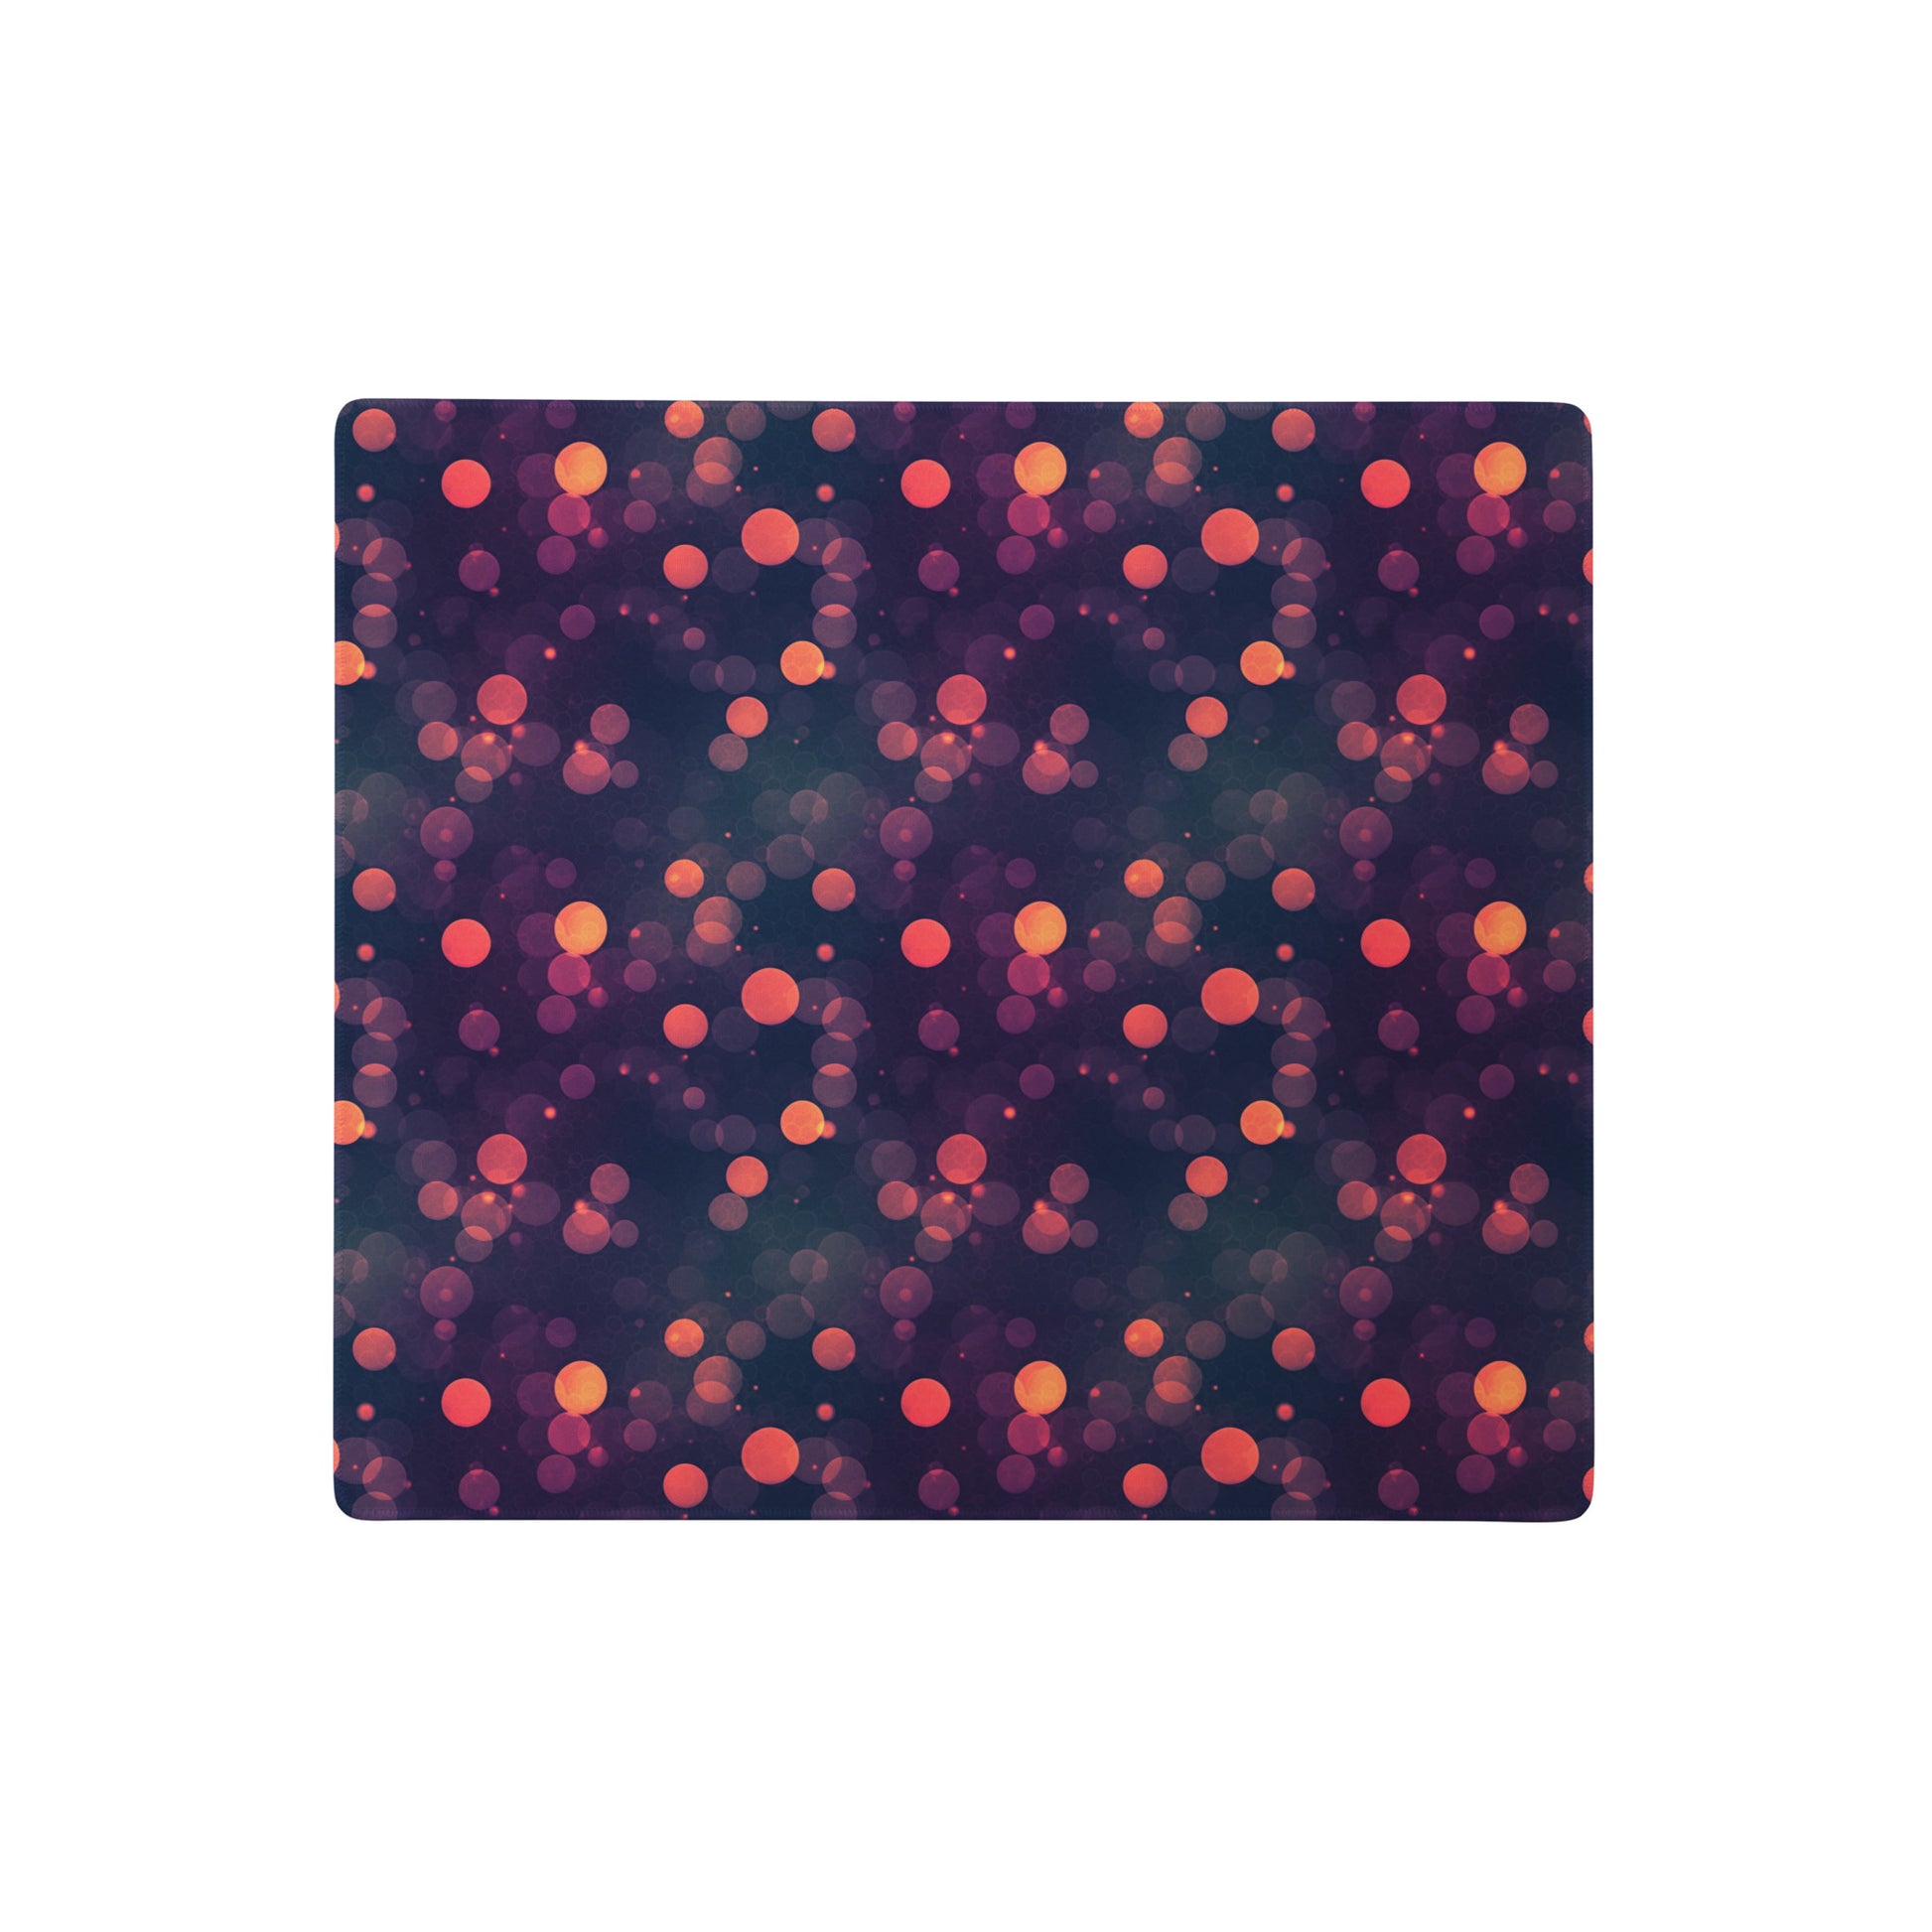 A 18" x 16" desk pad with a purple and red polka dot pattern.